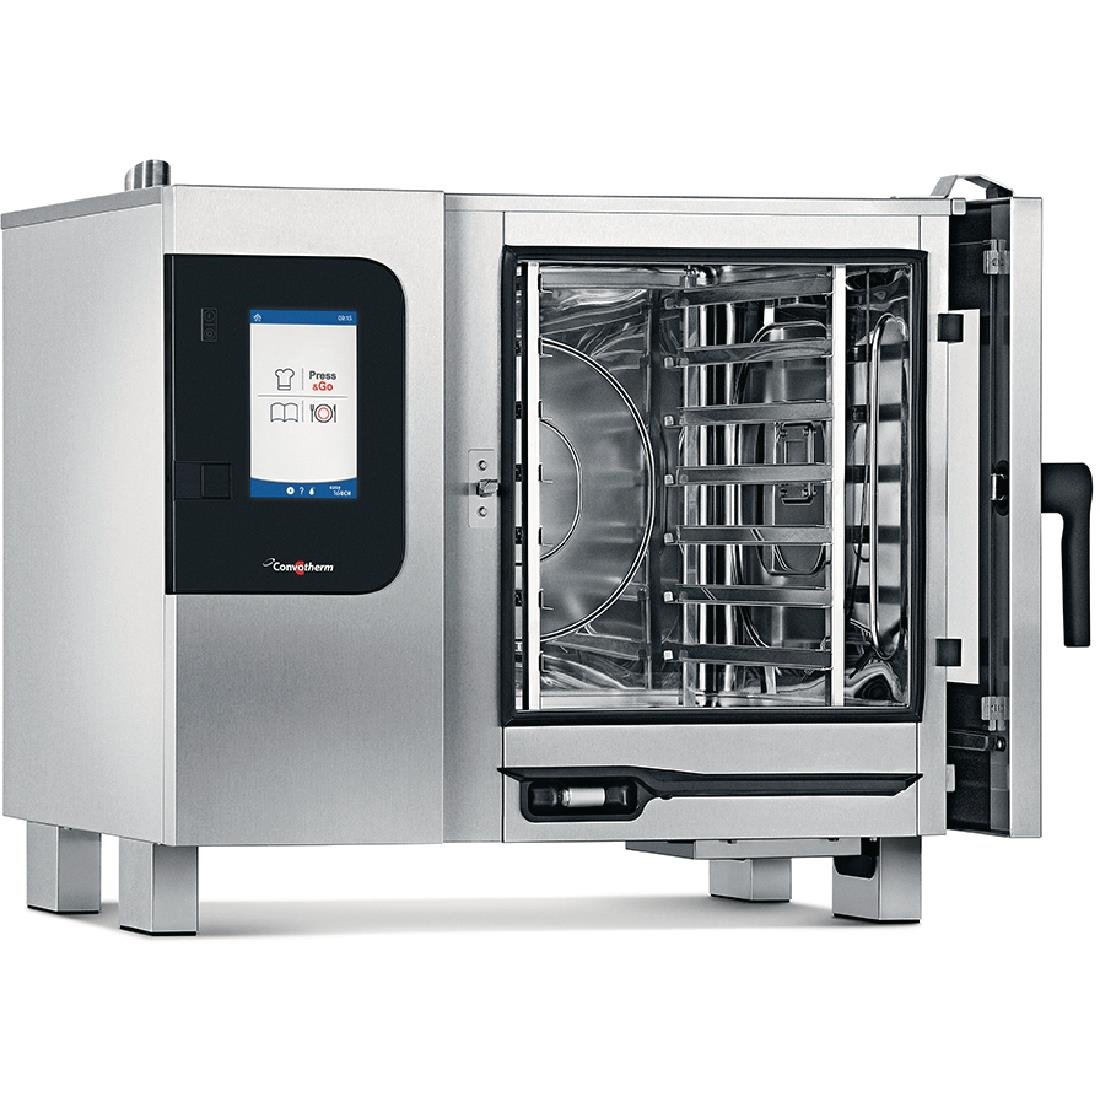 HC253-MO Convotherm 4 easyTouch Combi Oven 6 x 1 x1 GN Grid JD Catering Equipment Solutions Ltd